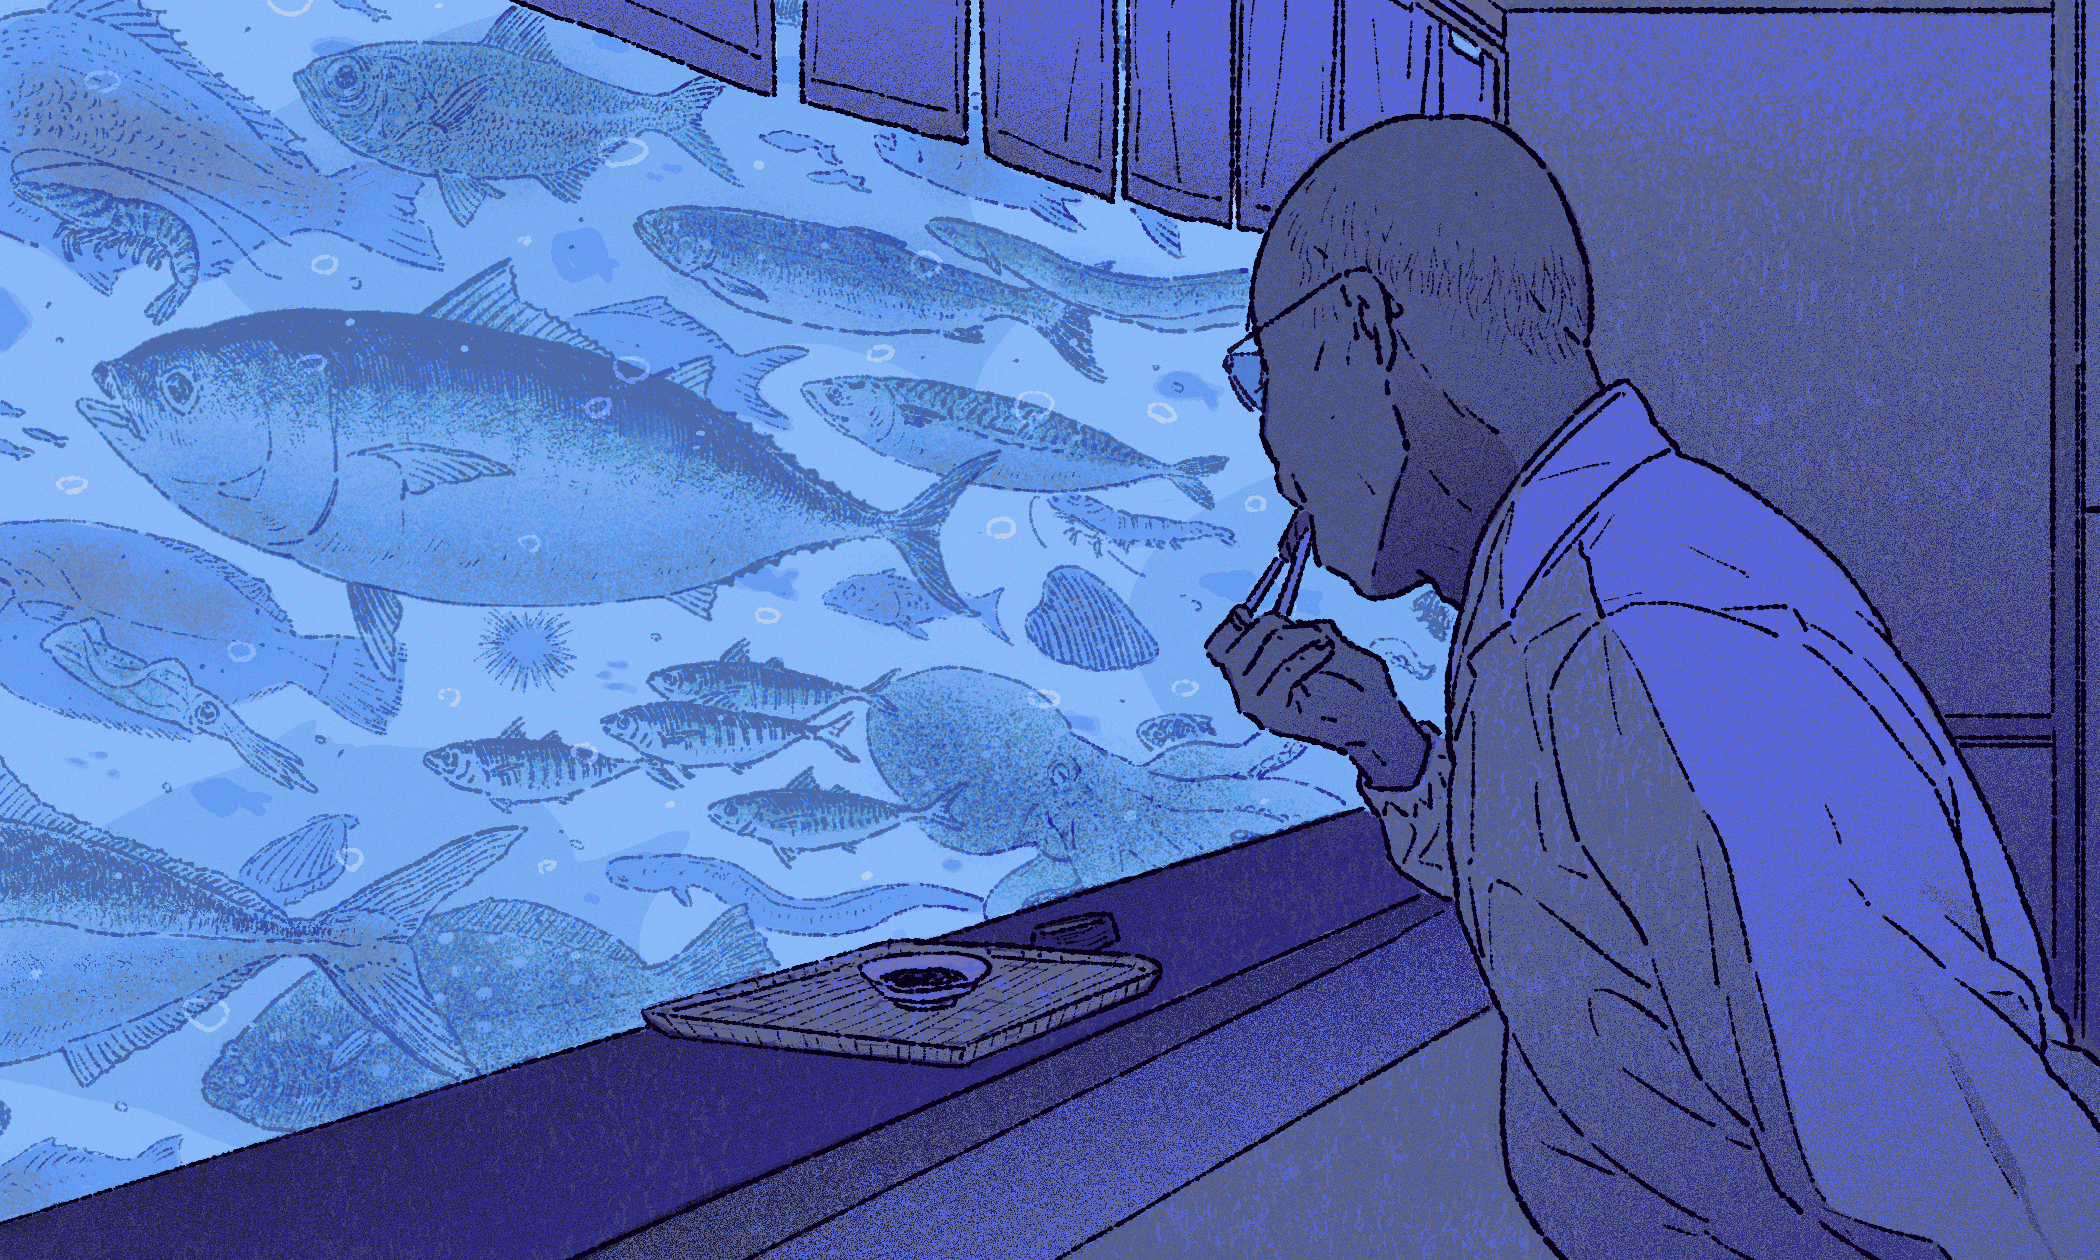 Illustration of a bald man bringing a pair of chopsticks to his lips as a seat of different fishes floats by him in the window outside.